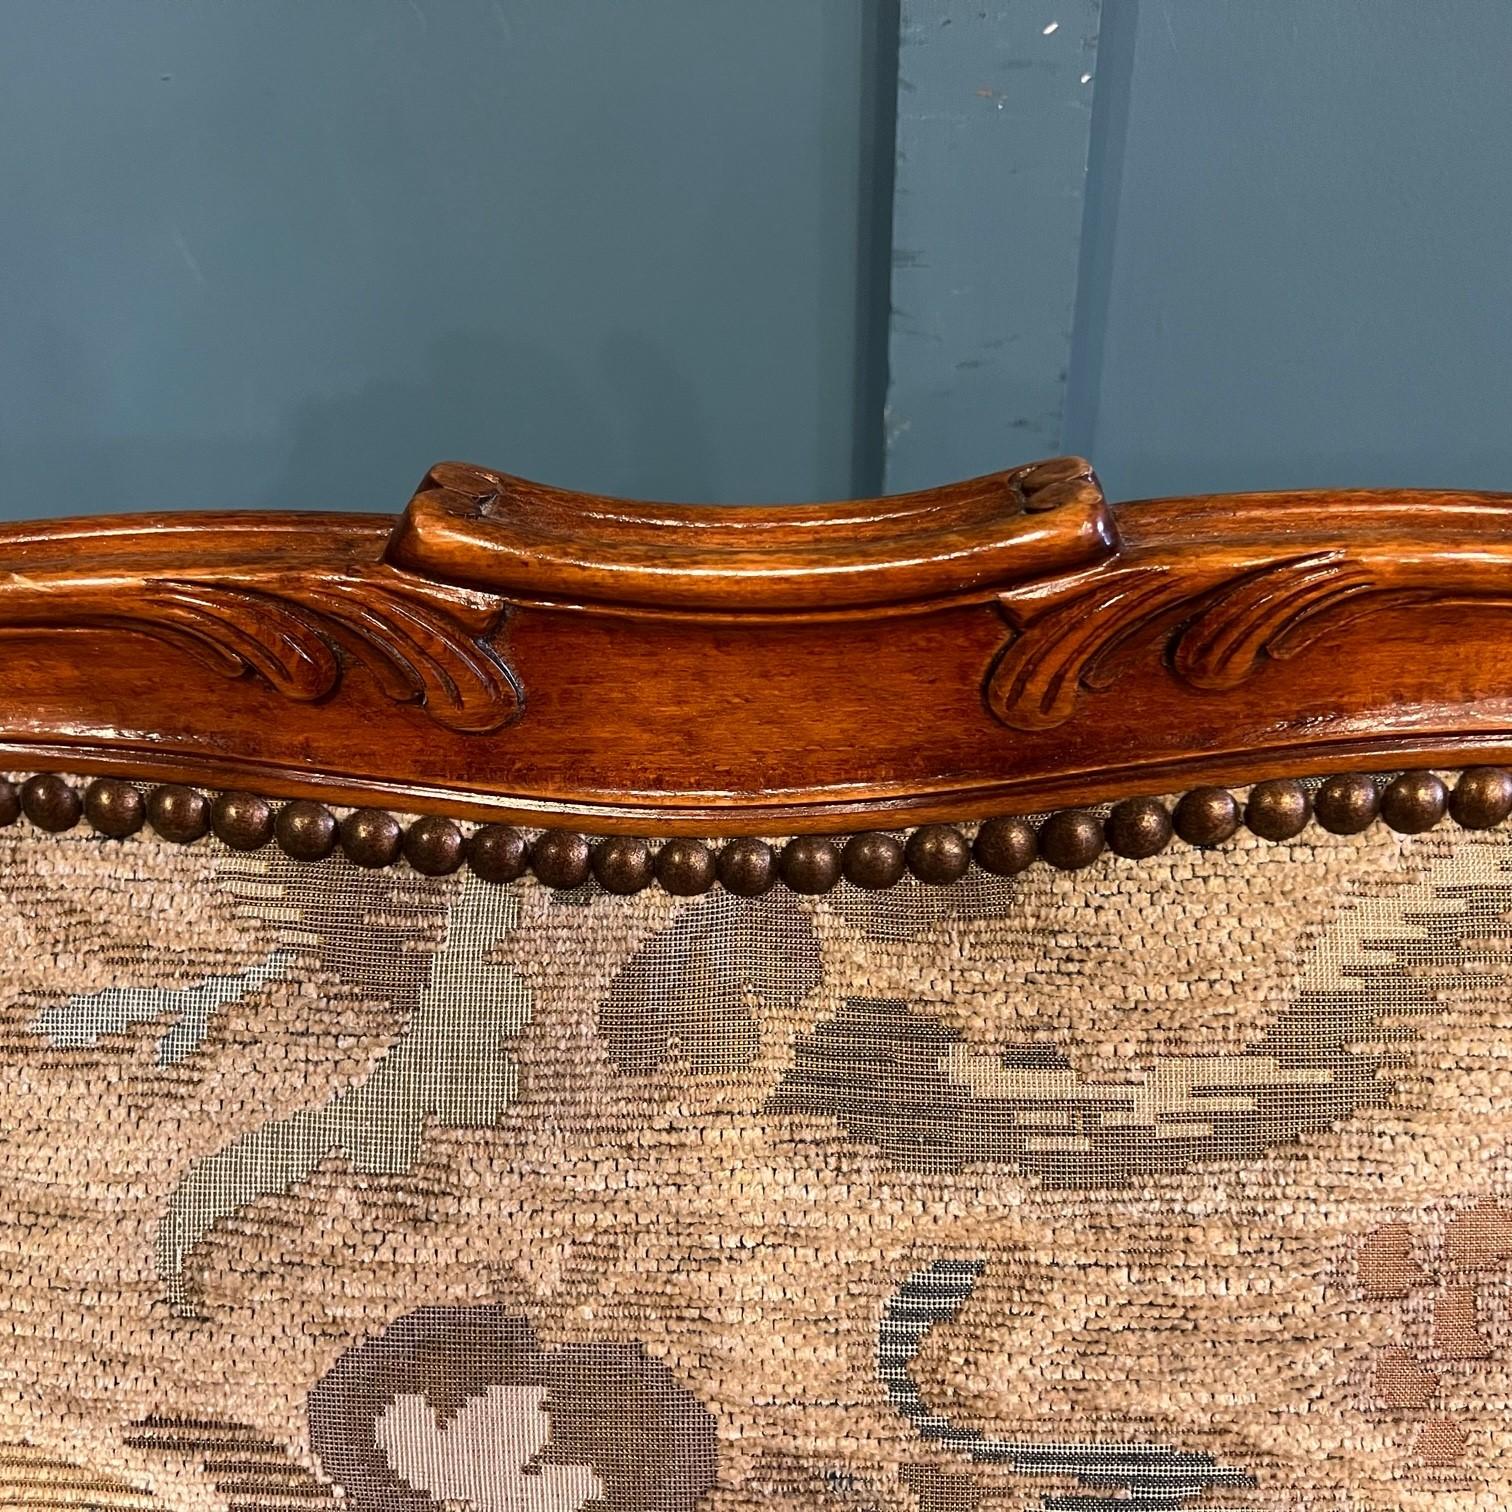 This antique French demi corbeille beech framed bed is perfect for the customer wanting an original show wood framed bed. The frame is Beech and has been stained to a lovely deep mellow colour. These wide beds are extremely hard to find.

The